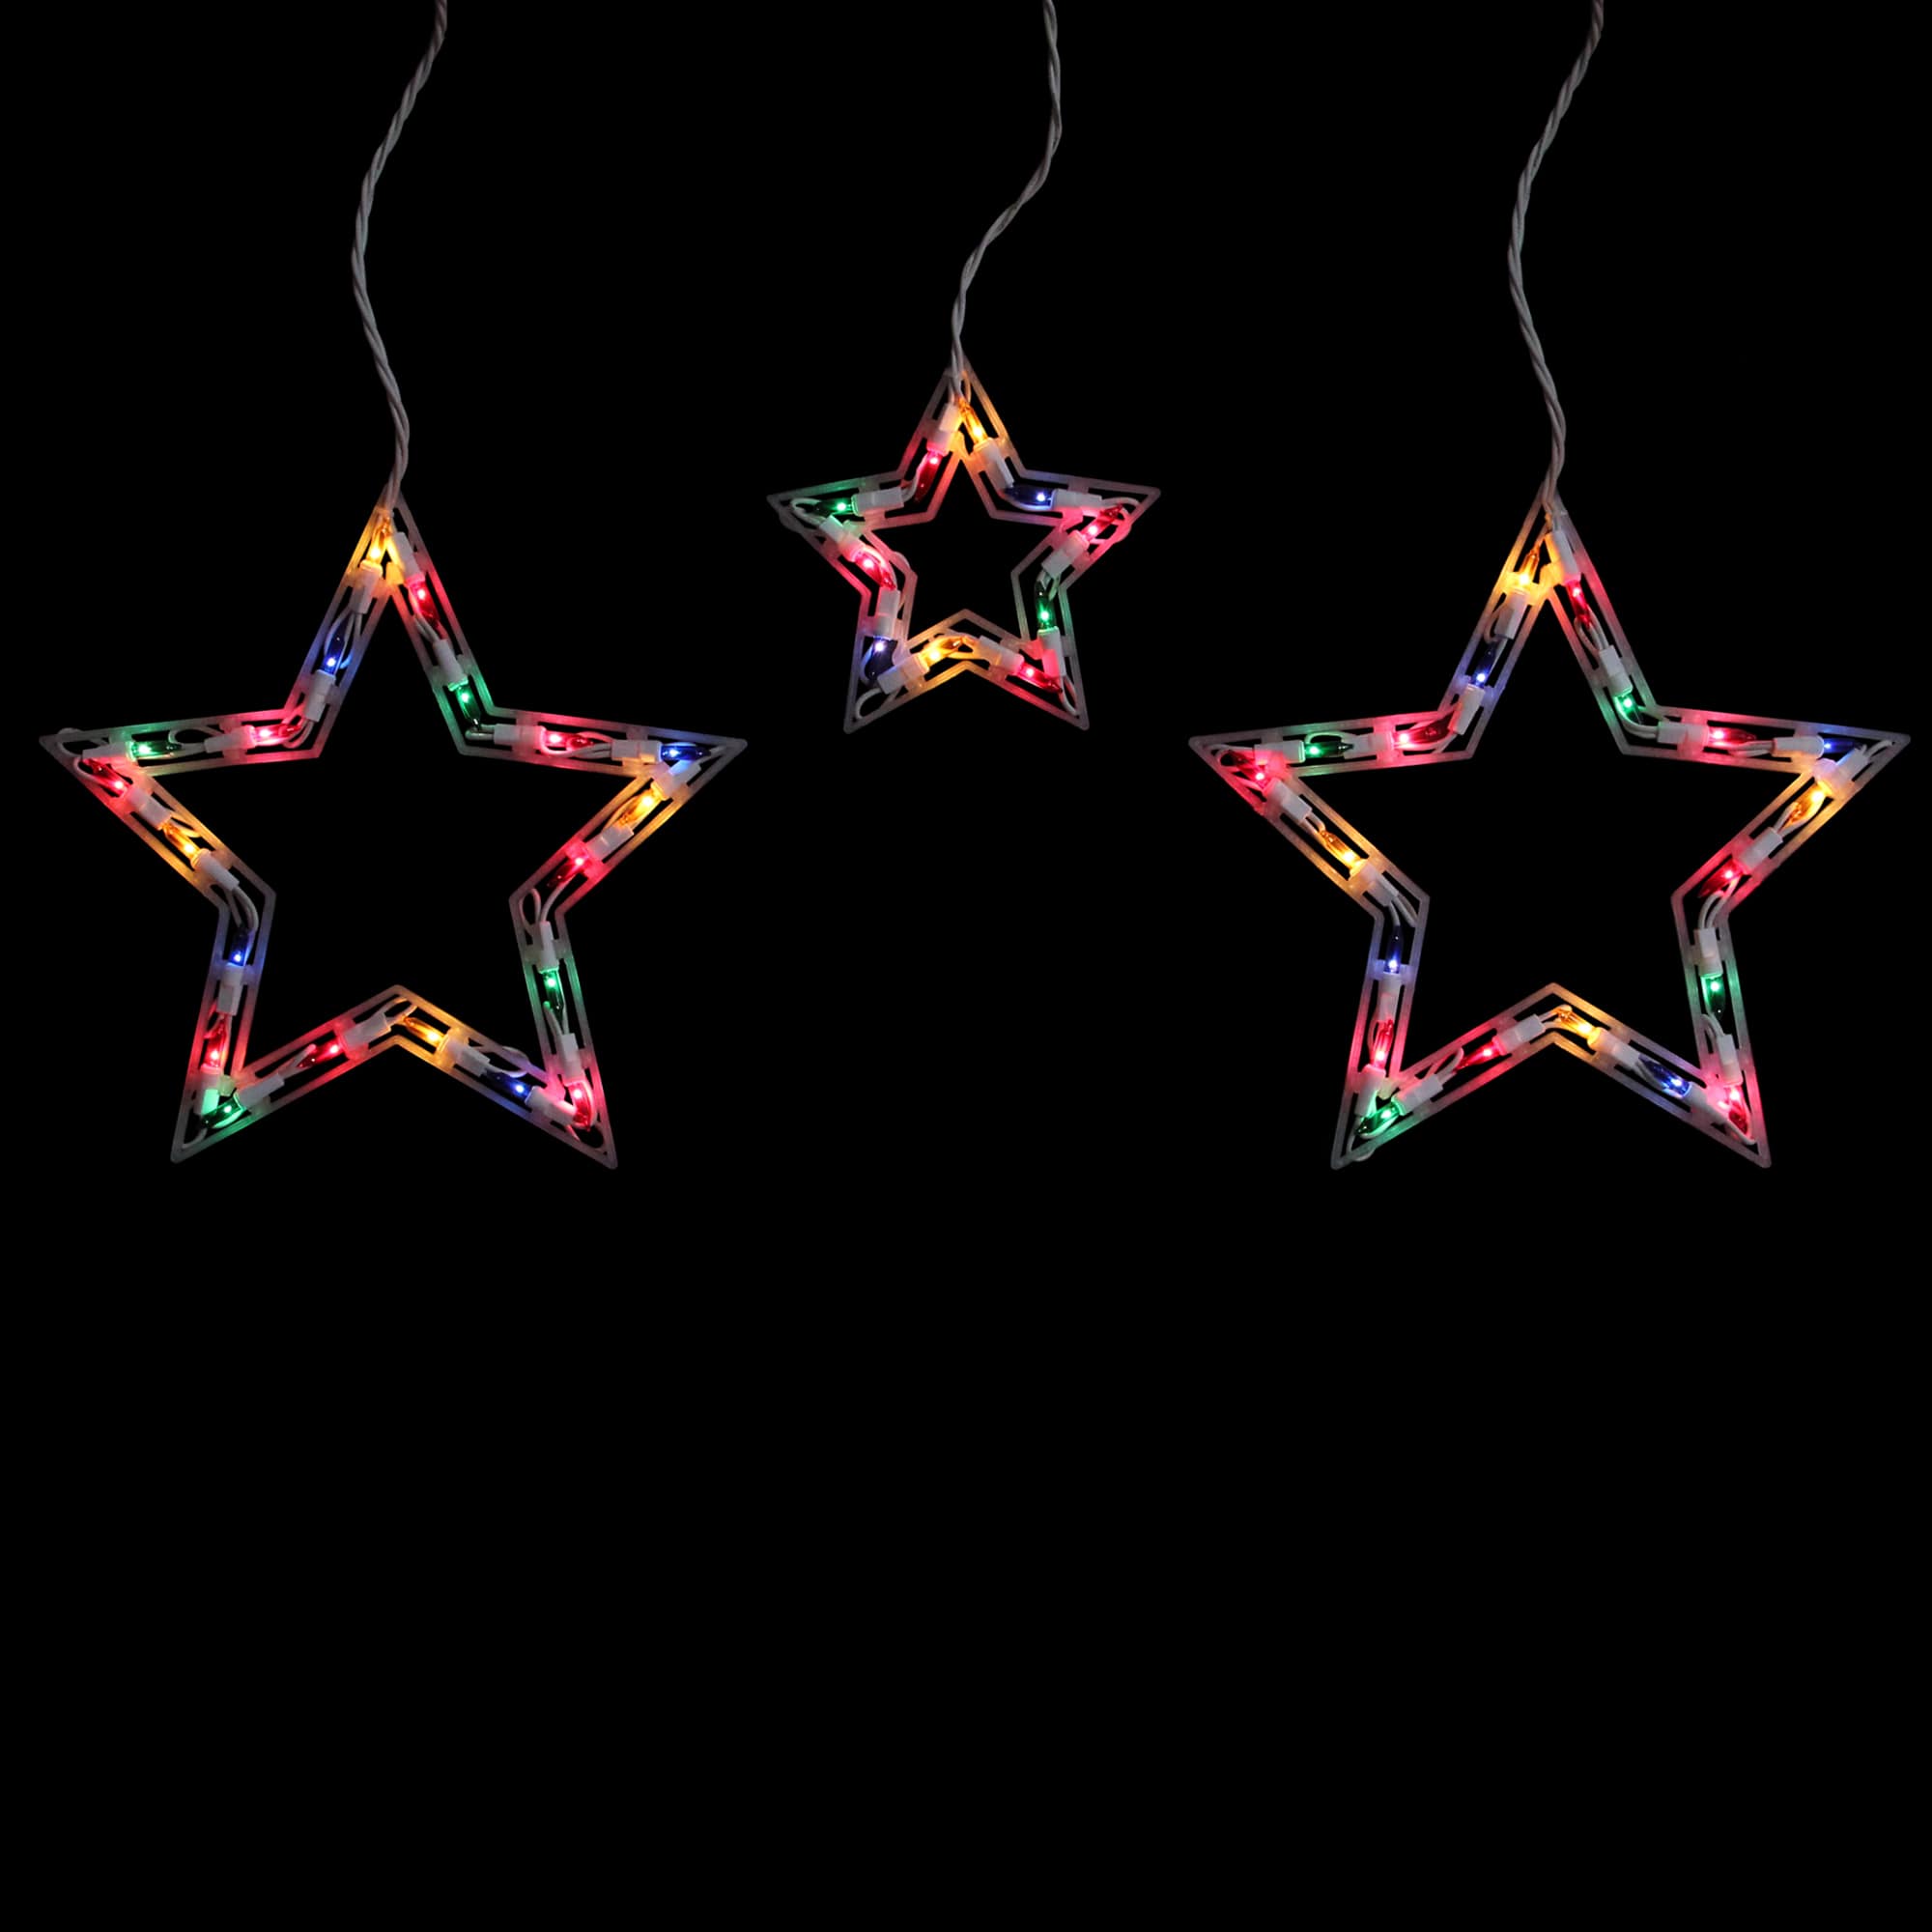 100ct. Multicolor Star Shaped Mini Icicle Lights with White Wire